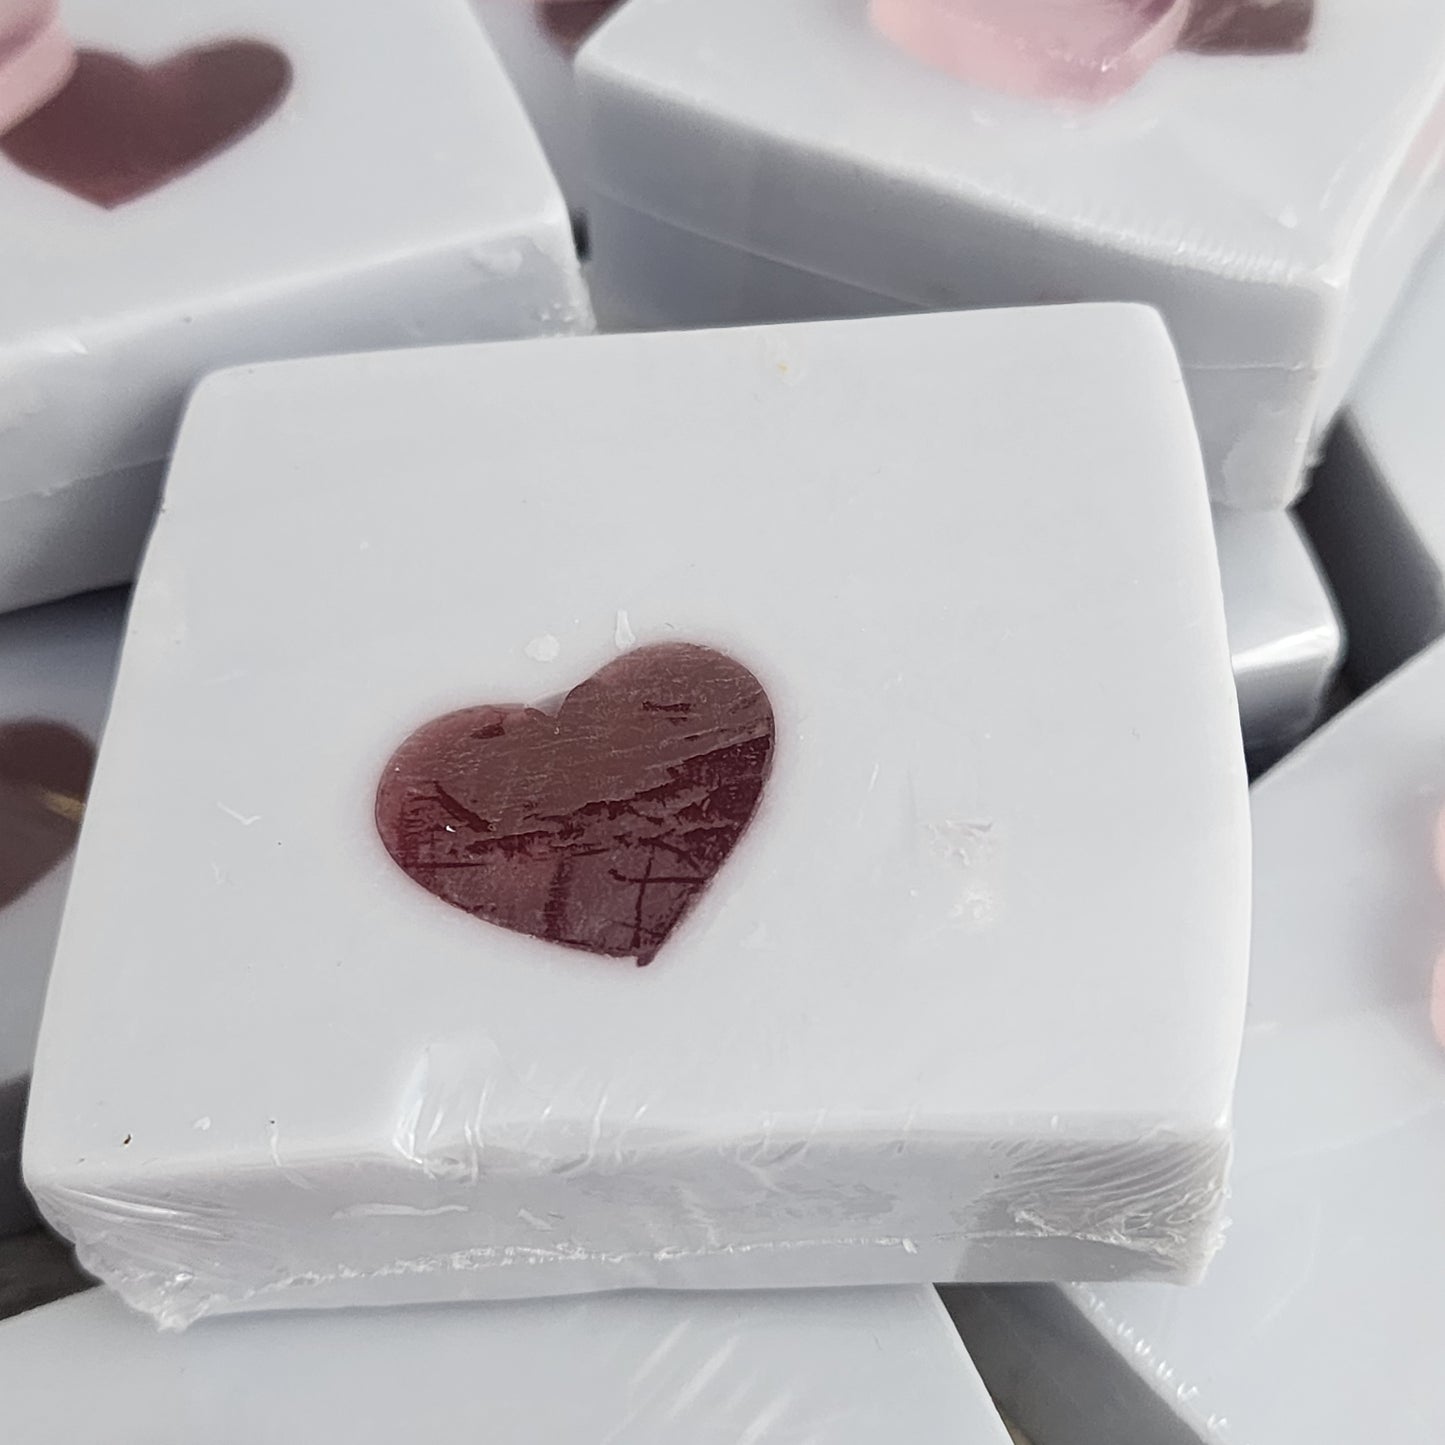 Lover's Bliss - Lavender-Rose Scented Goat Milk Soap with Hearts